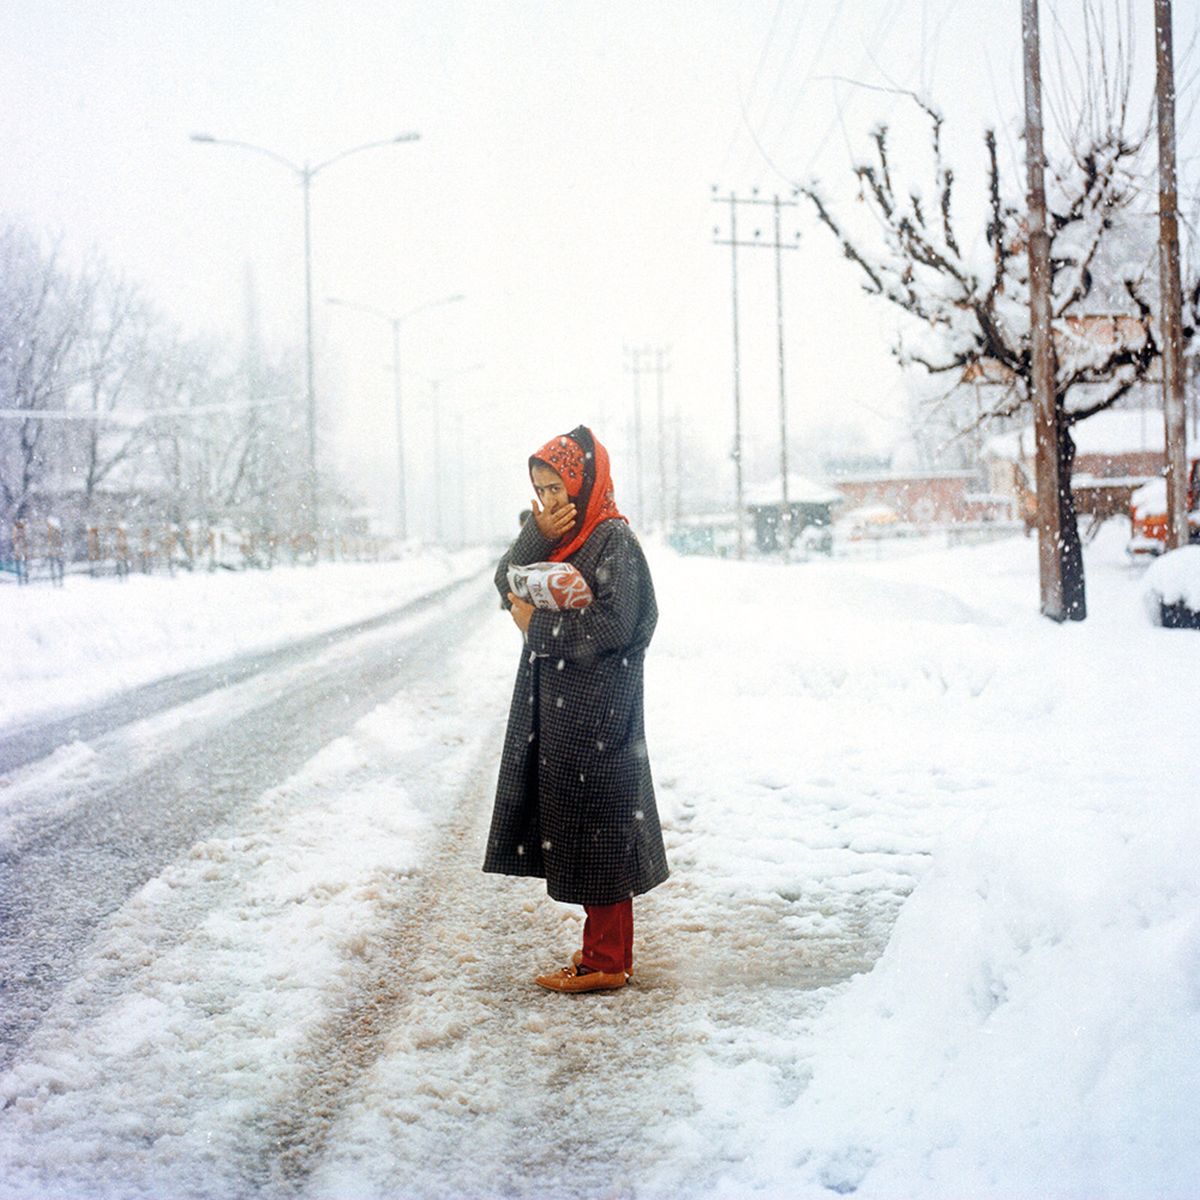 One of the portraits from Sohrab Hura’s Snow series (2014-ongoing) taken during winter in Kashmir © Sohrab Hura